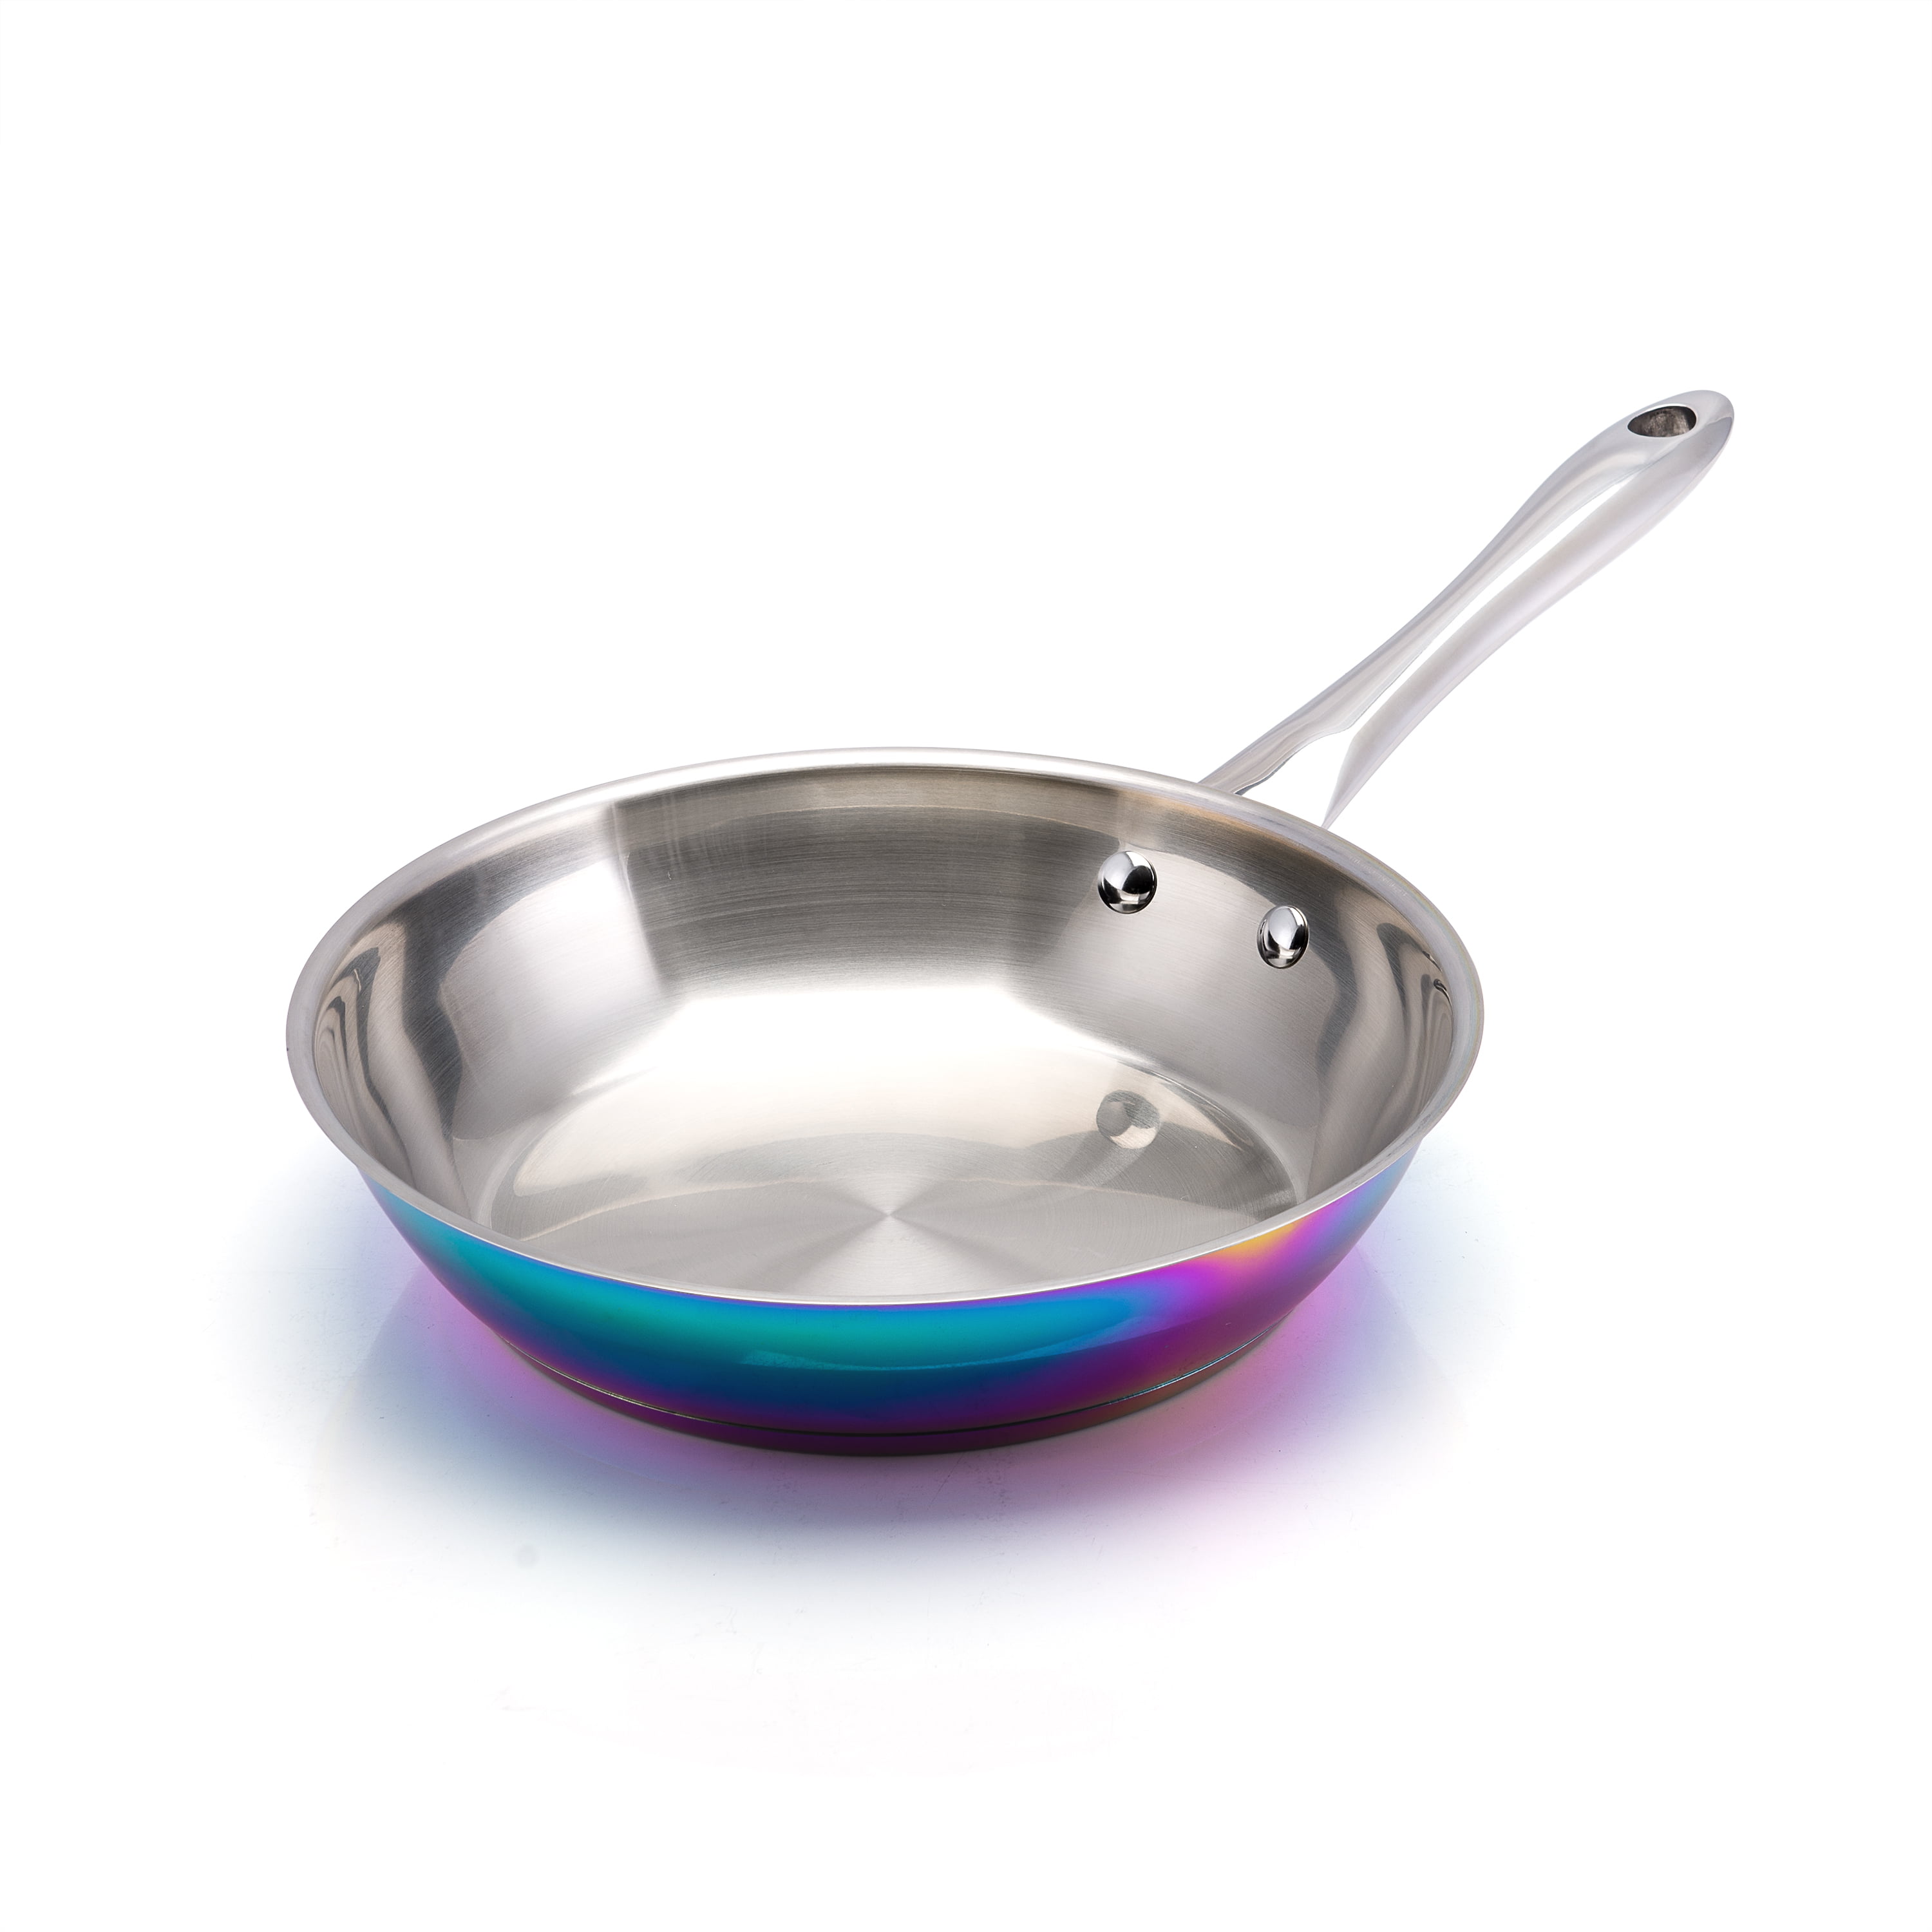 The Magical Kitchen Collection - Iridescent Rainbow Cookware Set - Premium Heavy Duty Stainless Steel and Titanium Pots & Pans Set - Lead Free, Rust